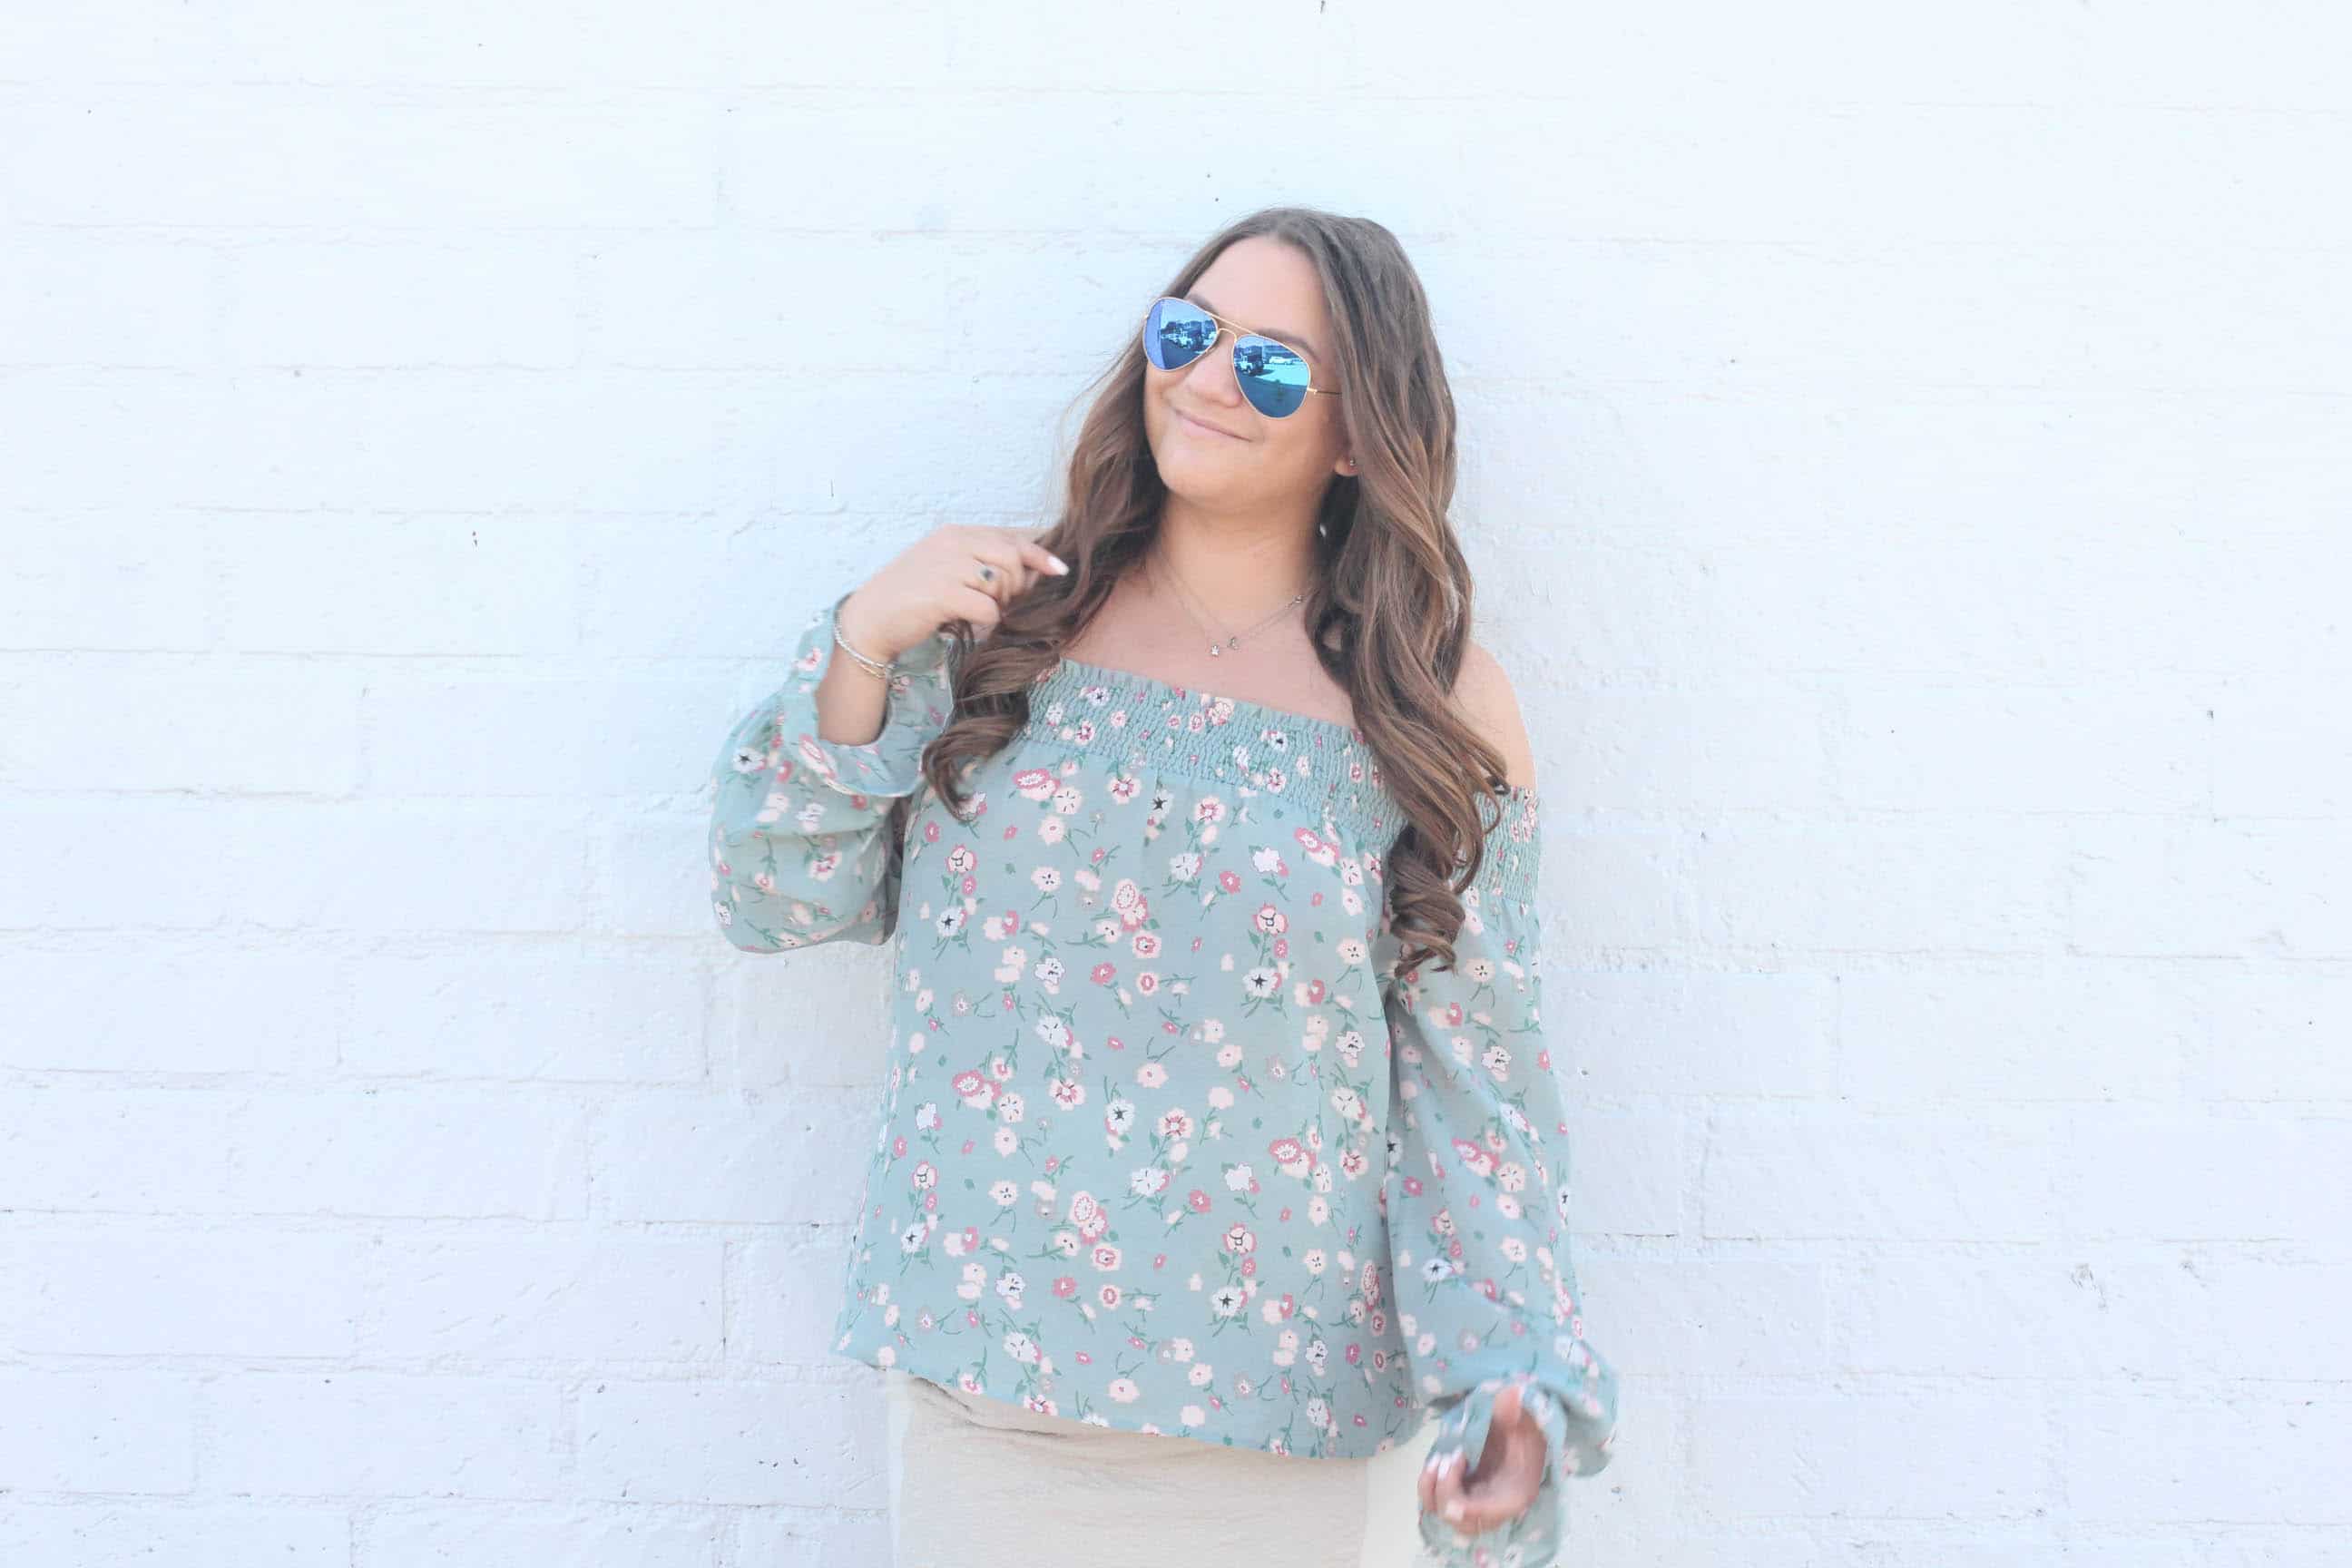 missyonmadison, missyonmadison instagram, fashion blog, fashion blogger, style blog, style blogger, wild blue denim, floral off the shoulder top, long sleeve floral off the shoulder top, la blogger, ootd, wiw, outfit inspo, outfit ideas, summer 2017 style, platform wedges, indigo road wedges, macys wedges, gigi ny, gigi new york, gigi new york crossbody bag, raybans, hair extensions, curled hair, hairstyle, hair trends, ombre hair, balayage hair, tan platform wedges, white bandage skirt, cream bandage skirt, flora top, floral cold shouler top, dust ya shoulders off,